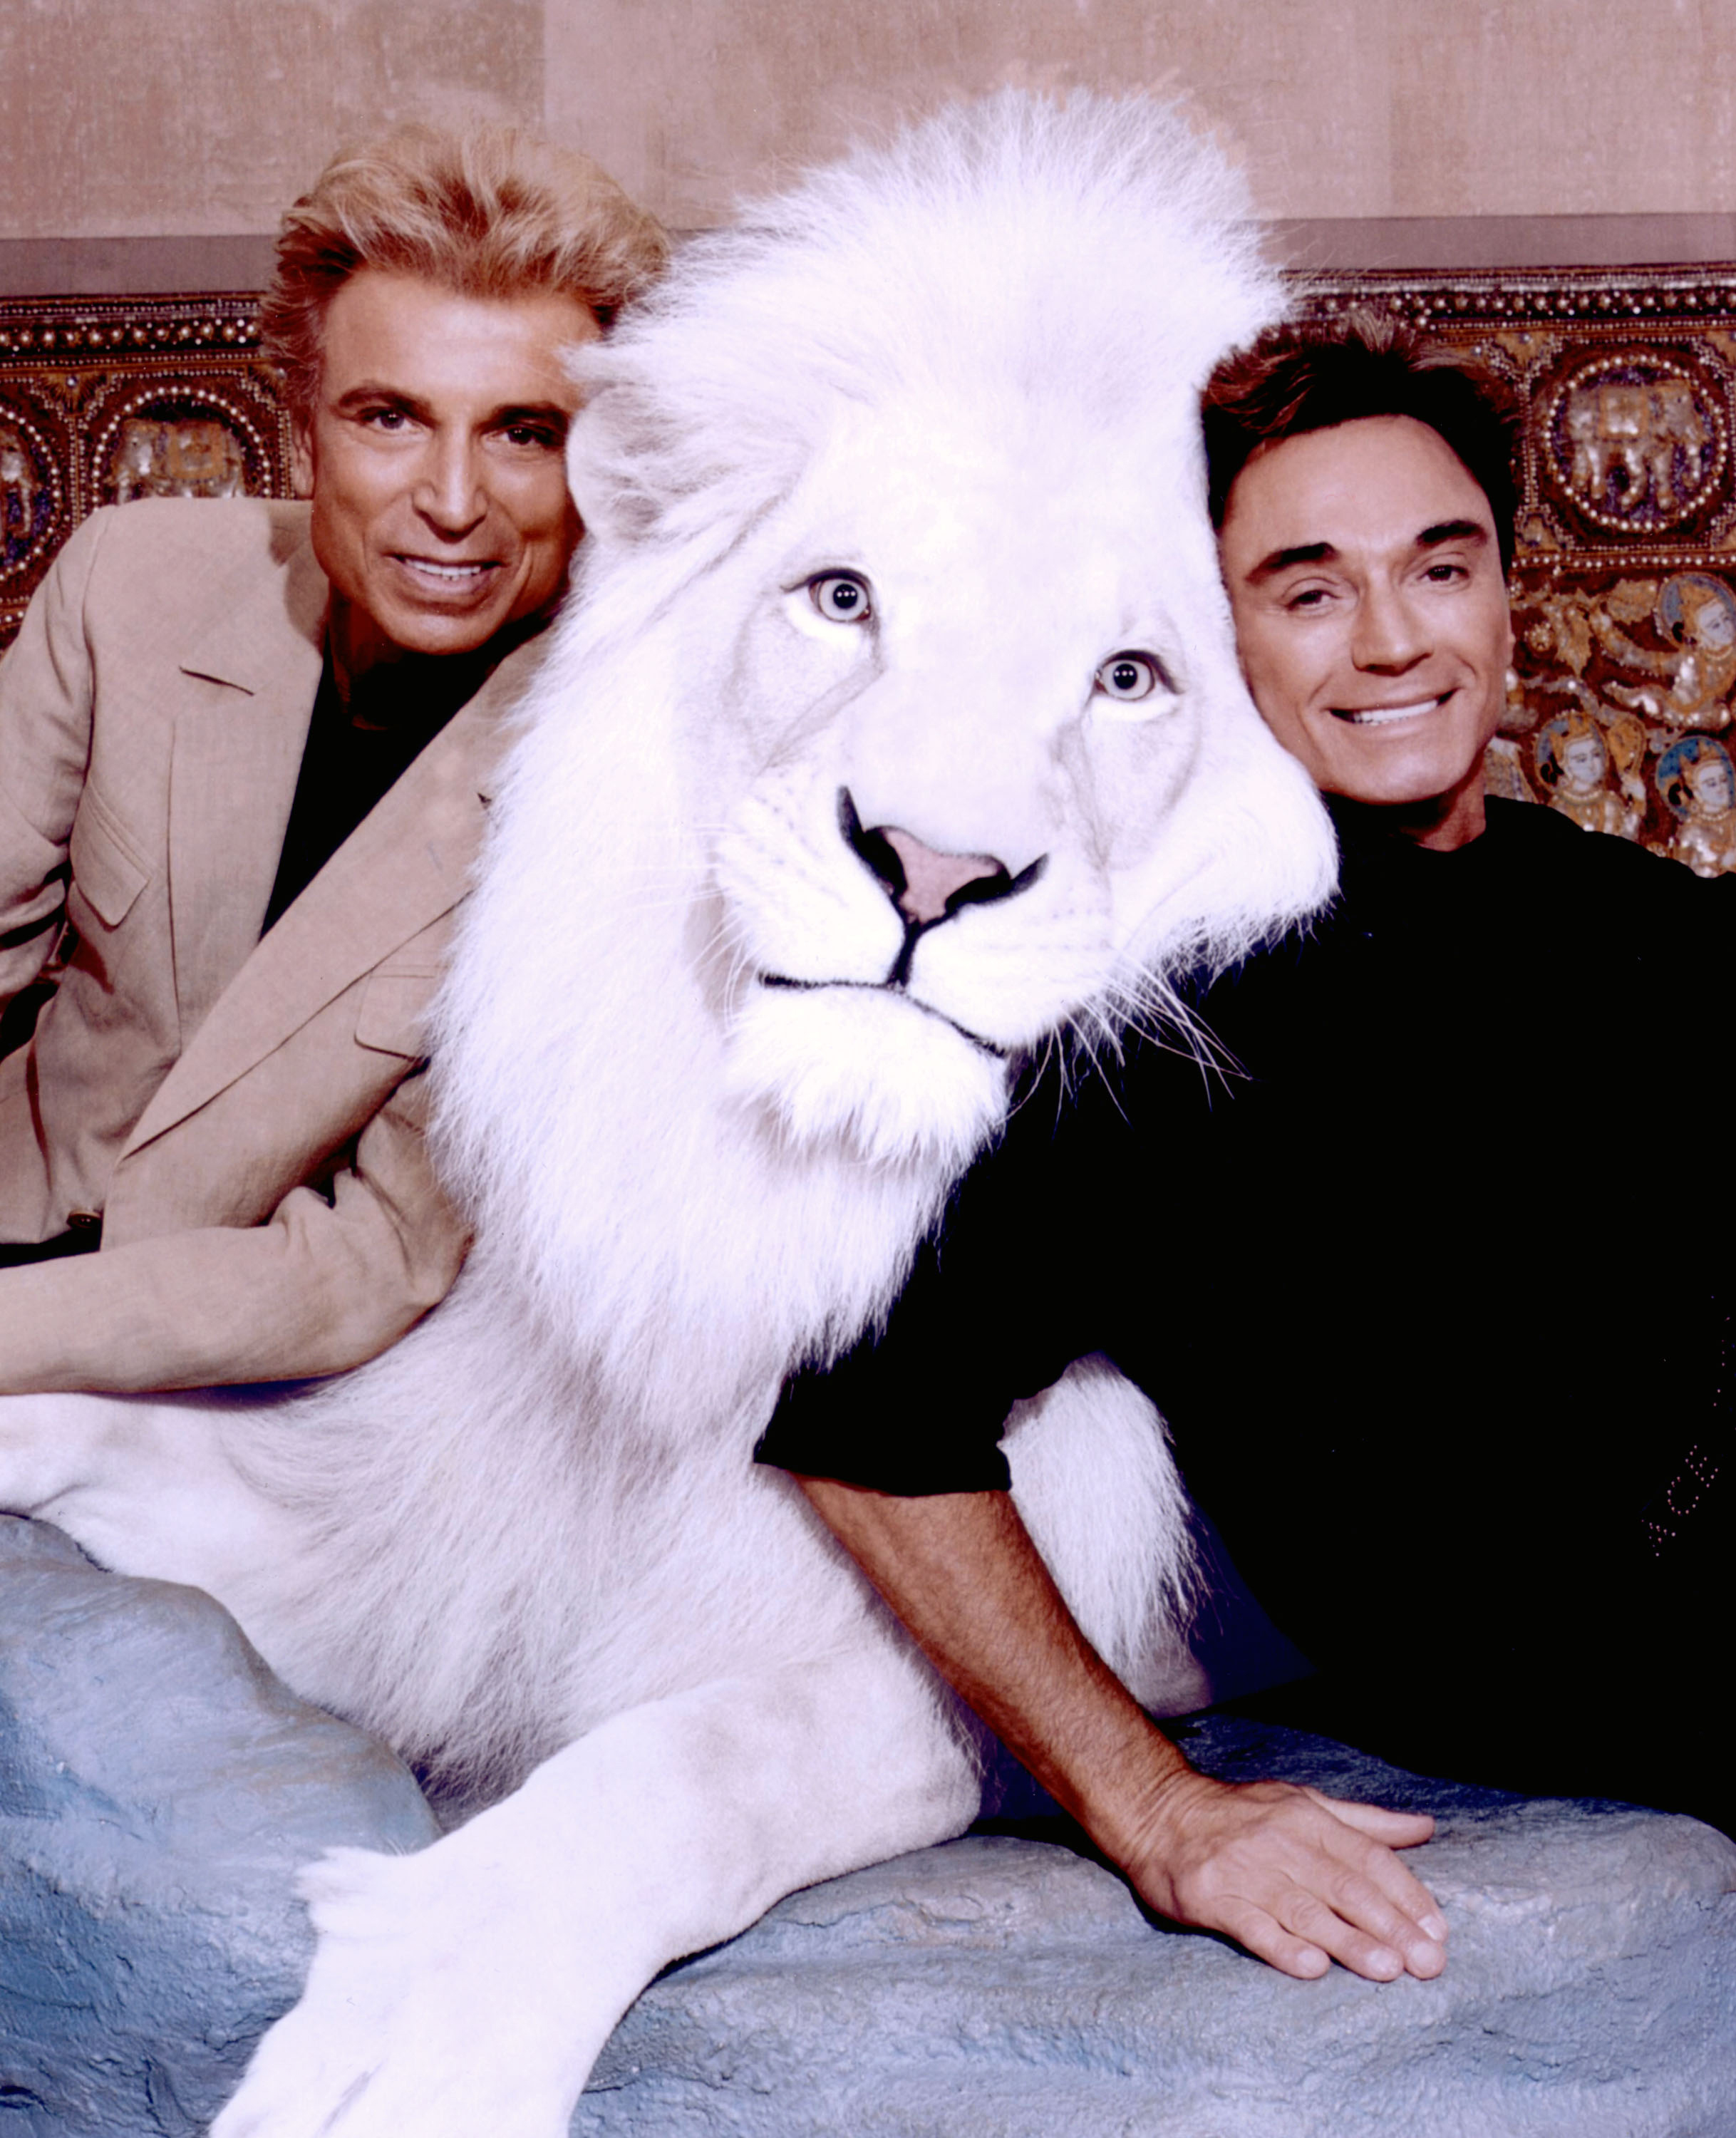 World-renowned illusionists and conservationists Siegfried &amp; Roy pose with Pride, the Magical White Lion in this undated photo. (Siegfried &amp; Roy—Getty Images)